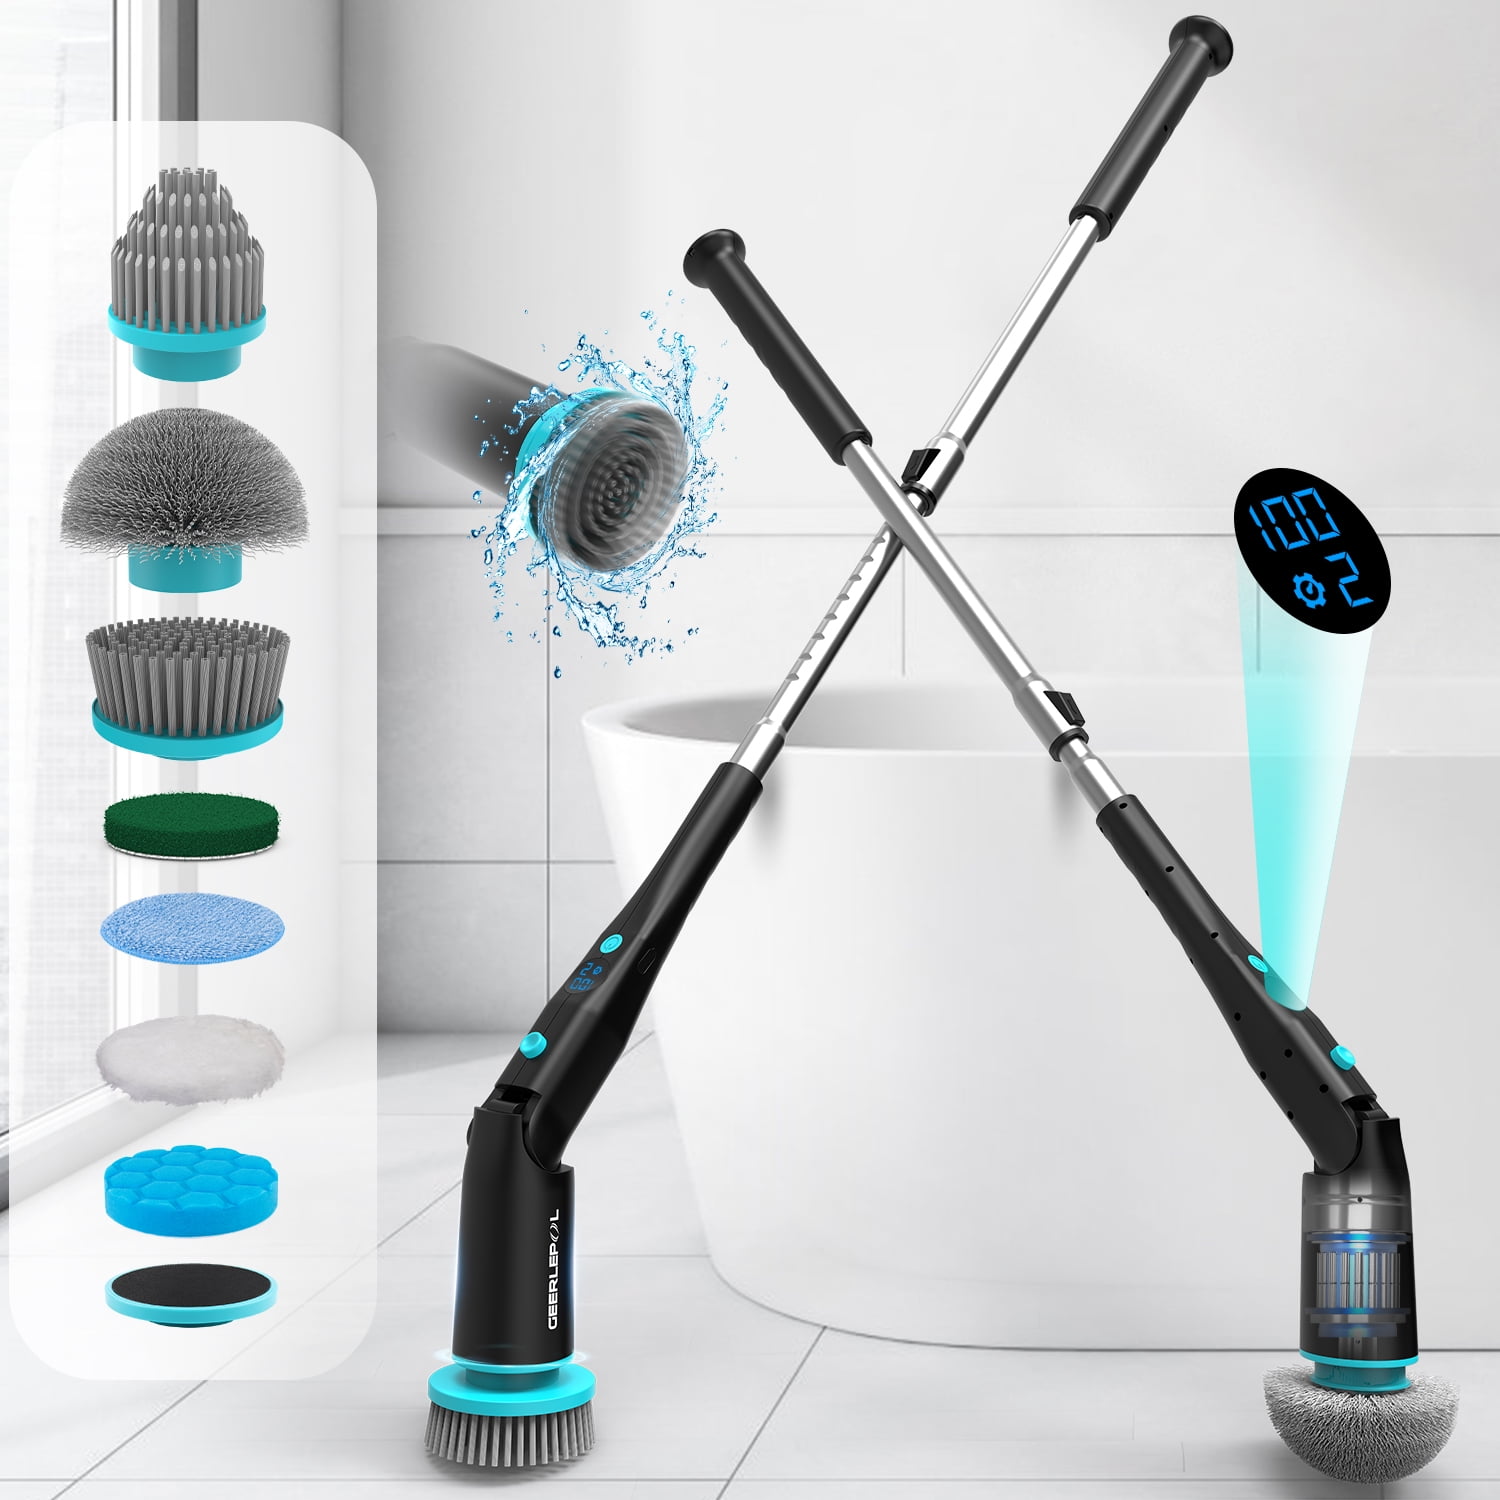 Amiluo Electric Scrubber with 2 Batteries, 1200RPM Electric Spin Scrubber  with 8 Cleaning Brushes, Cordless Power Scrubber for Tub/Kitchen/Wall/Floor